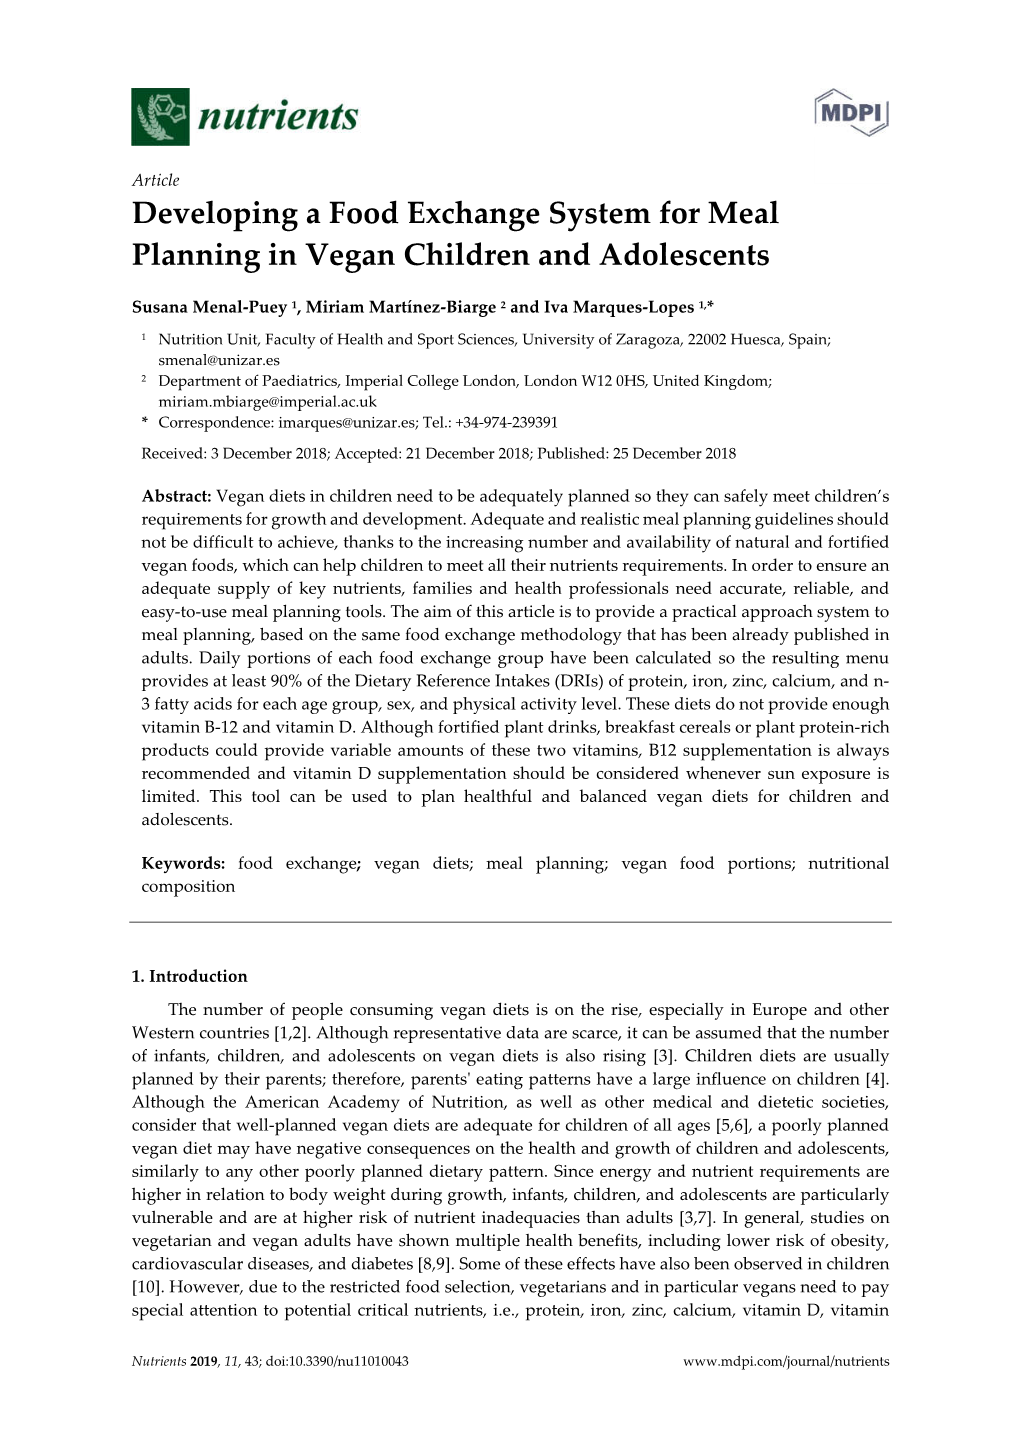 Developing a Food Exchange System for Meal Planning in Vegan Children and Adolescents